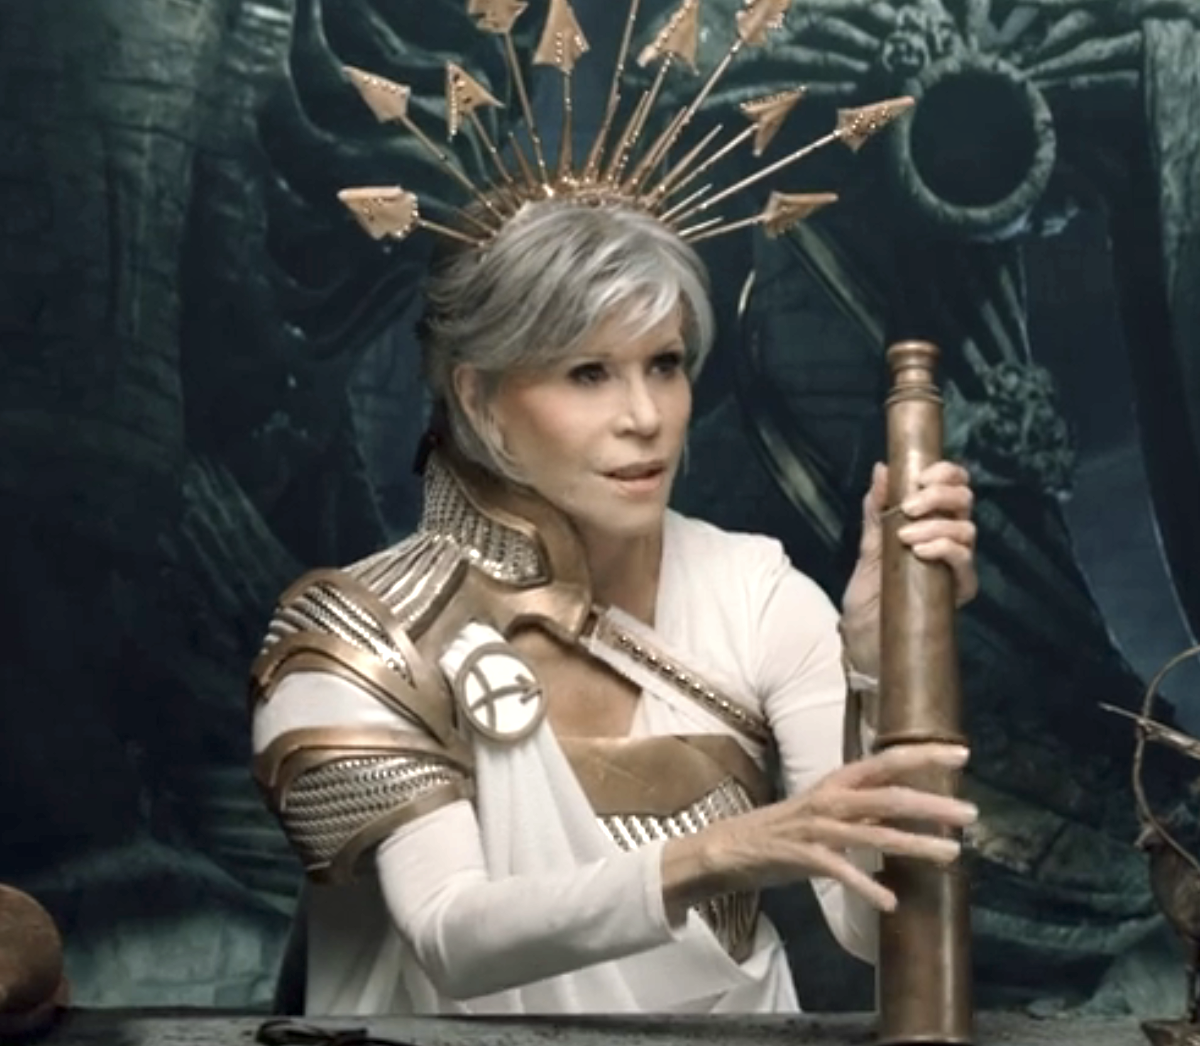 Jane Fonda in a sci-fi costume with a spiked crown and metallic arm pieces